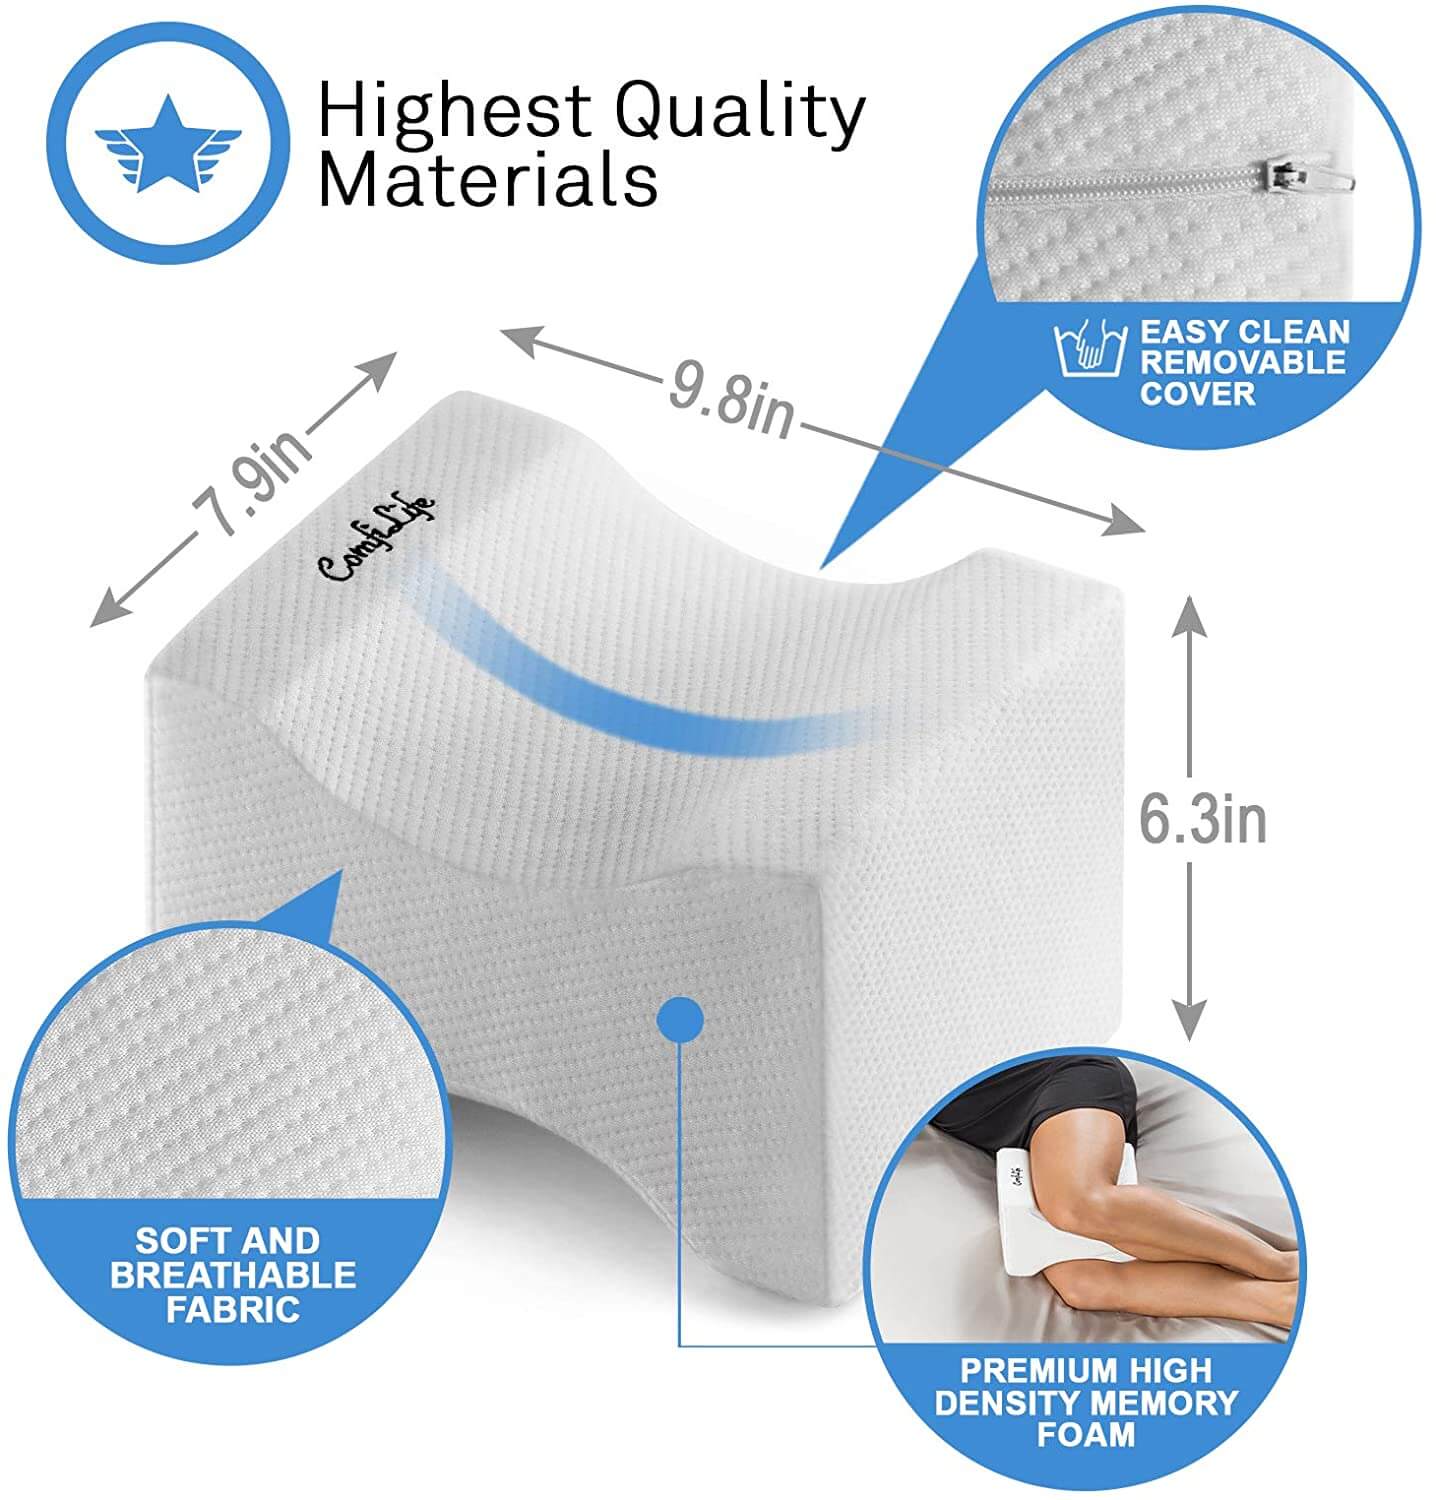 Details about   Sweetylife Knee Pillow for Back Pain Sciatica Relief Memory Foam Leg Pillow Wash 